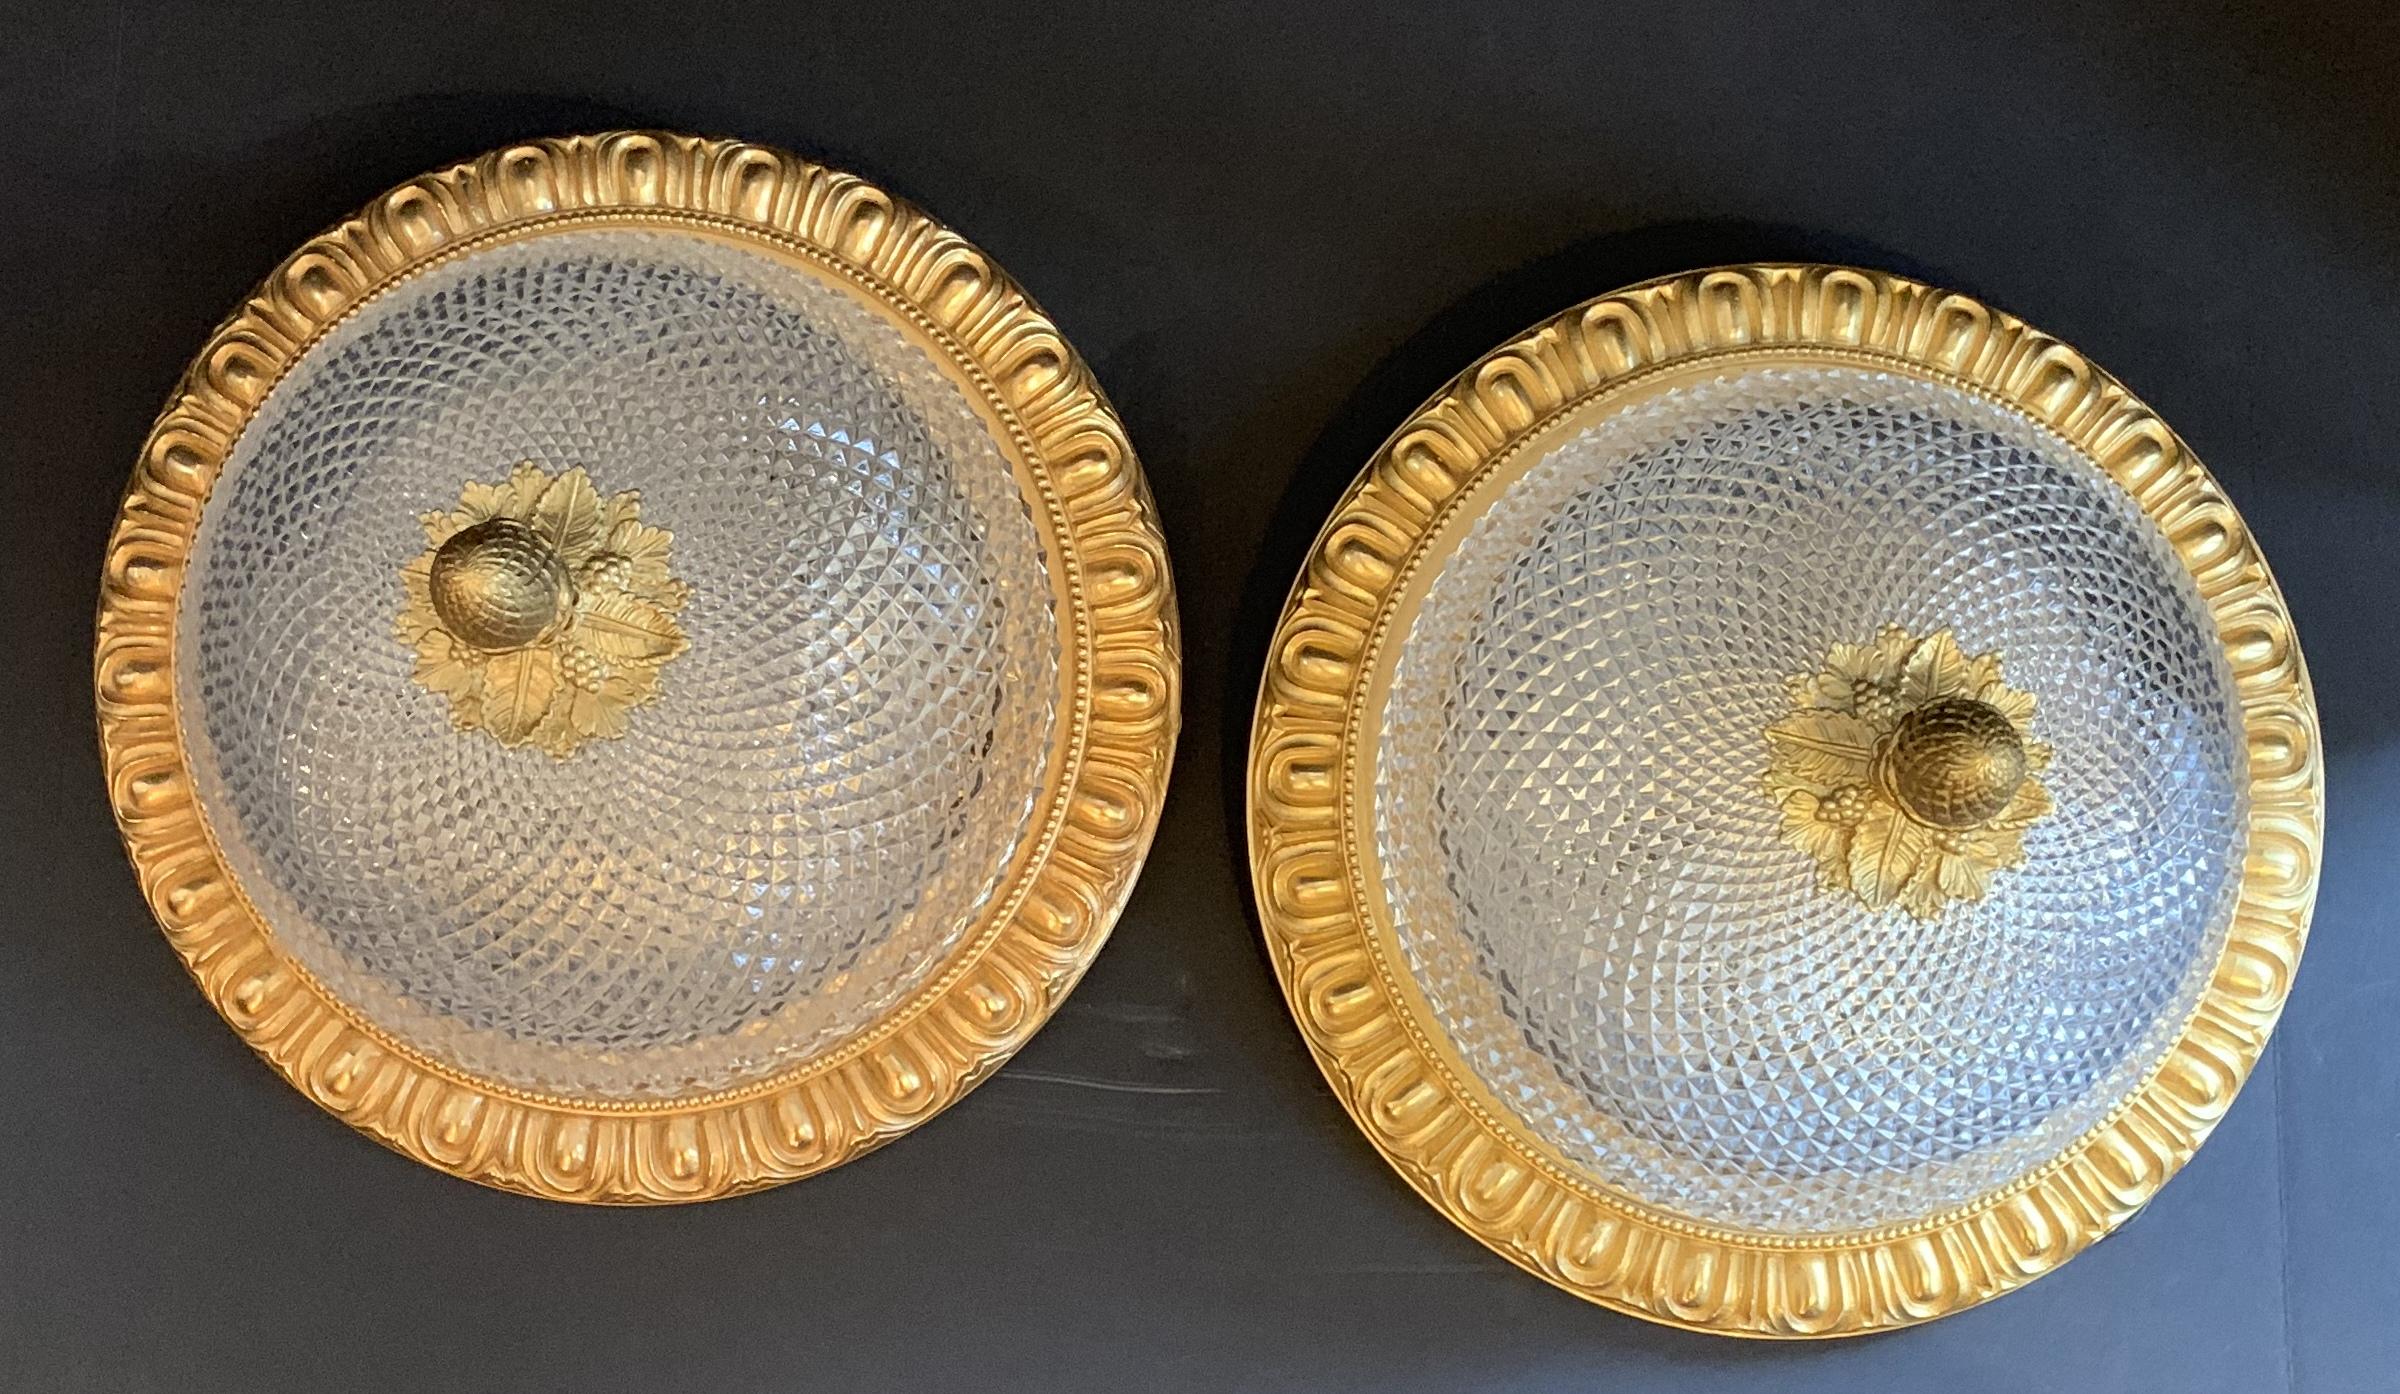 A fine pair of Sherle Wagner egg and dart flush mount bronze and crystal / glass acorn finial fixtures
Each with Edison lights inside.

Each sold separately.
 